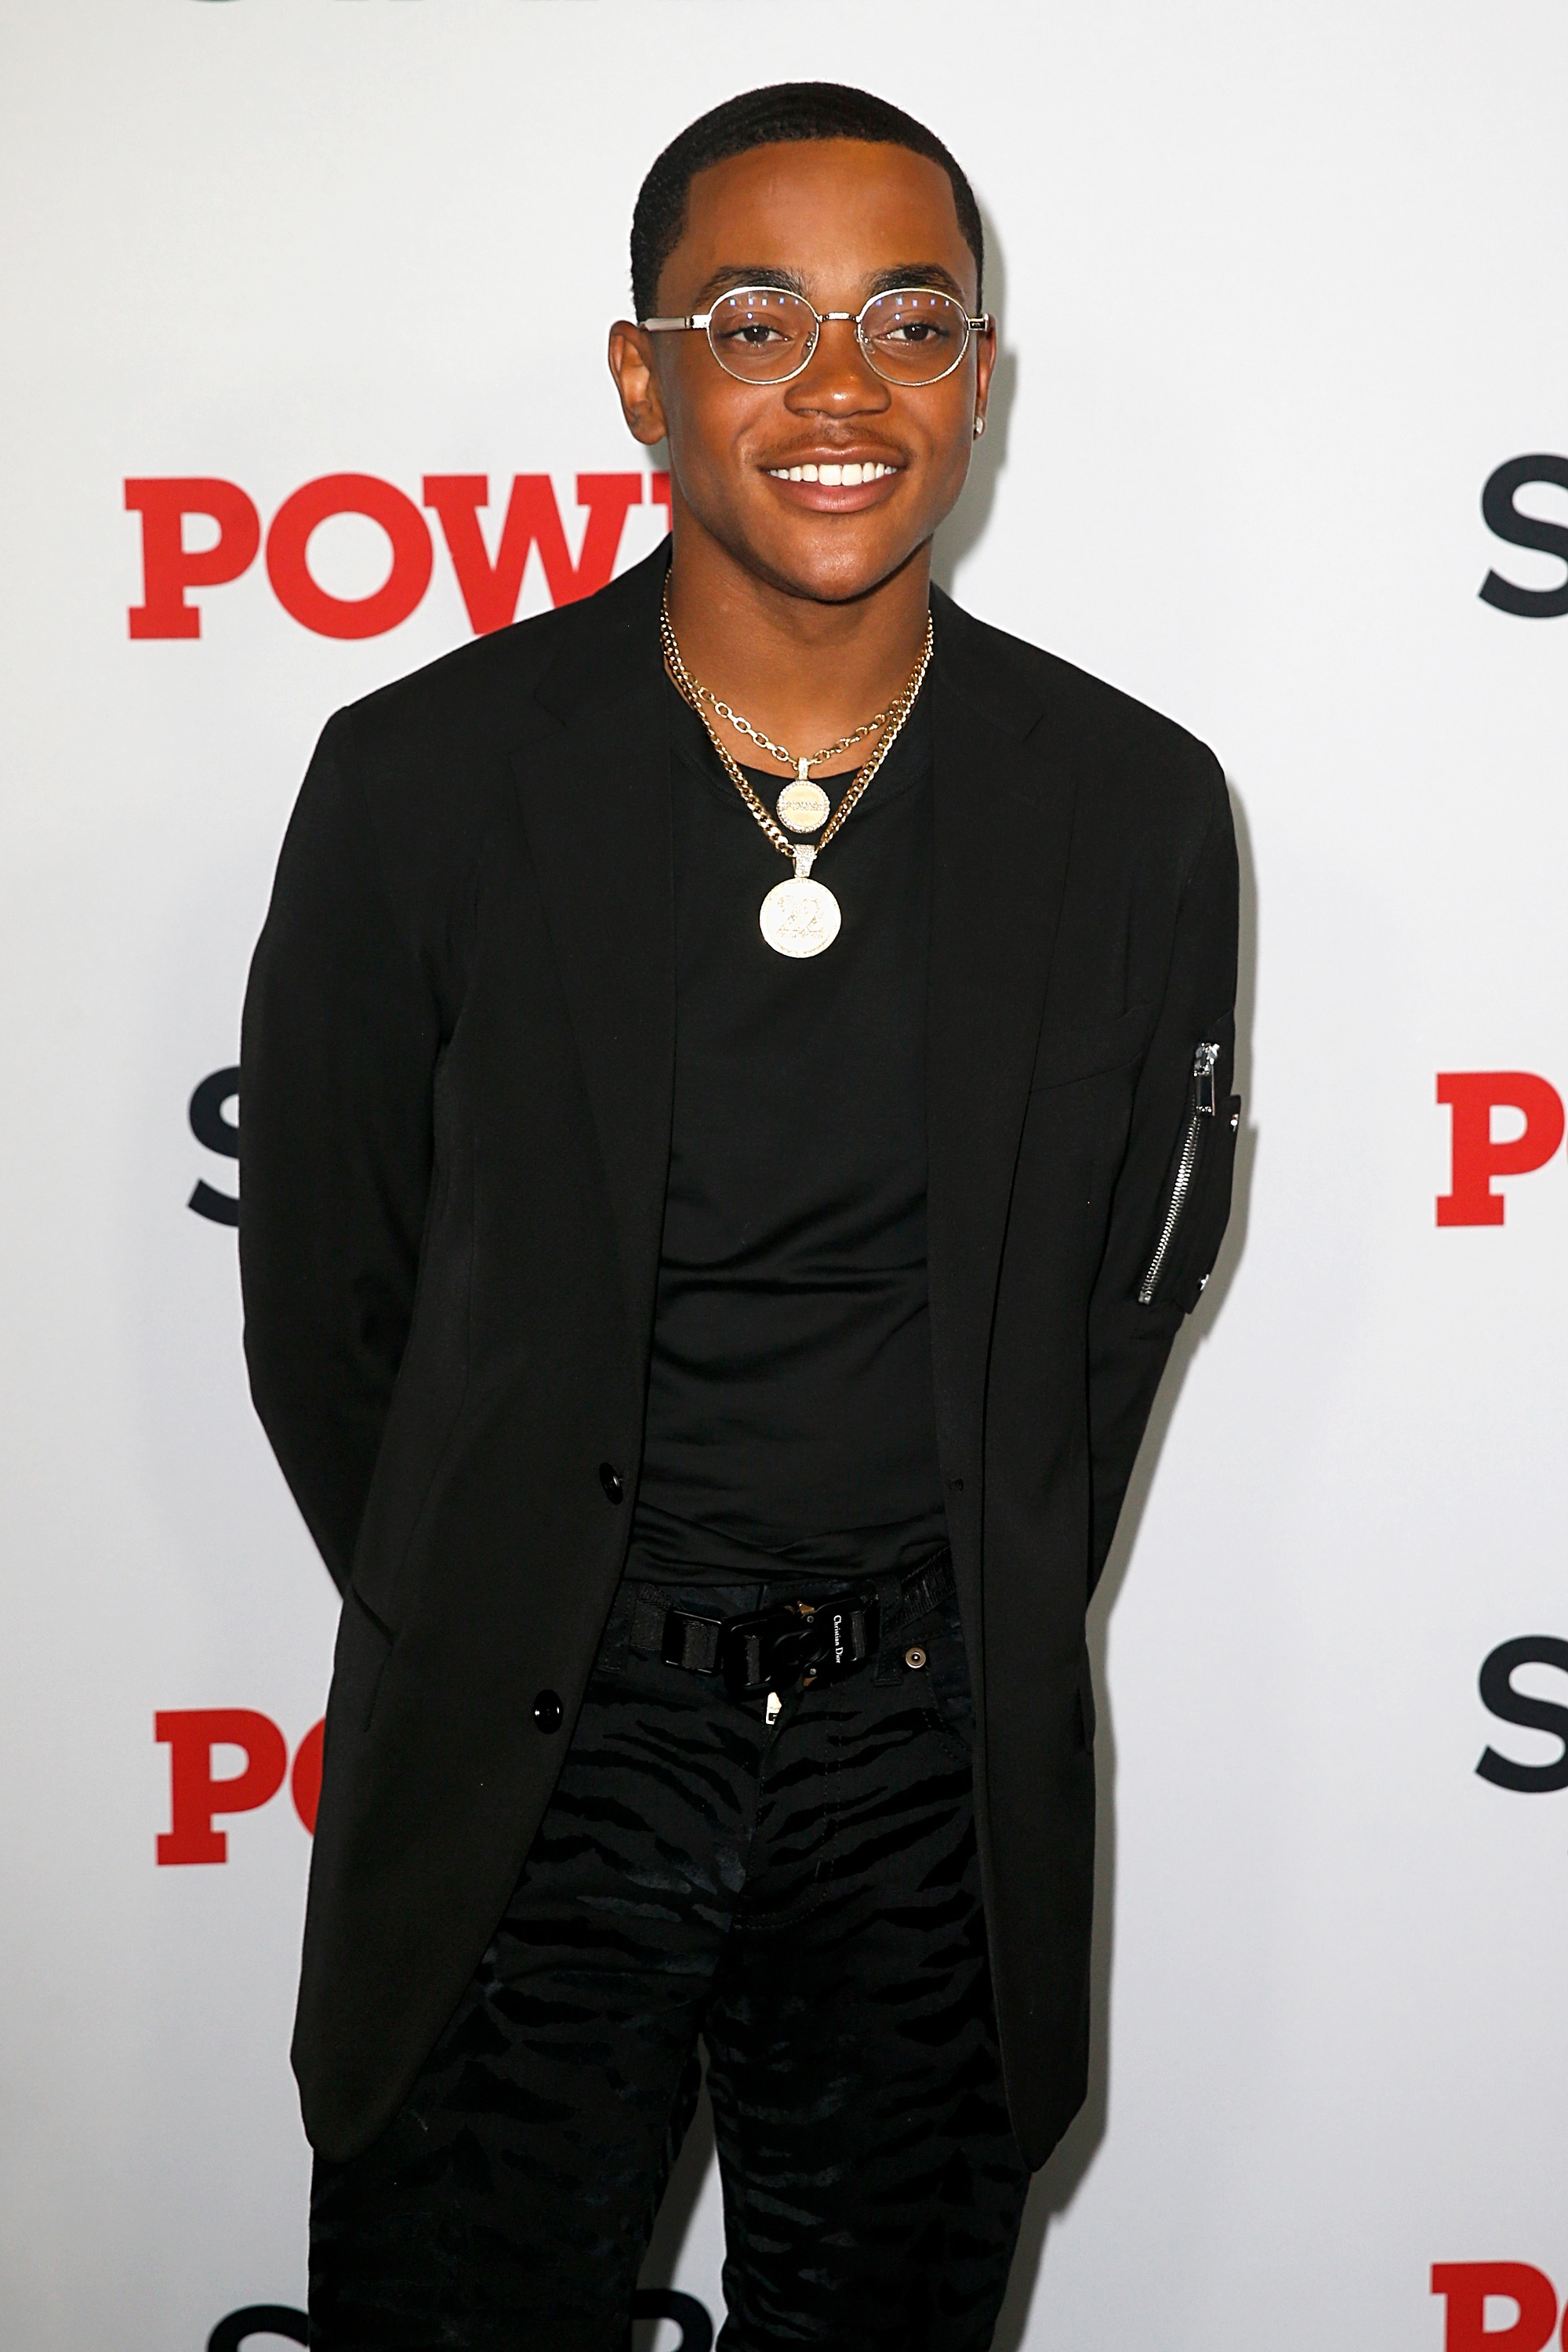 Michael Rainey Jr. attends the "Power" final season world premiere at The Hulu Theater at Madison Square Garden on August 20, 2019, in New York City. | Source: Getty Images